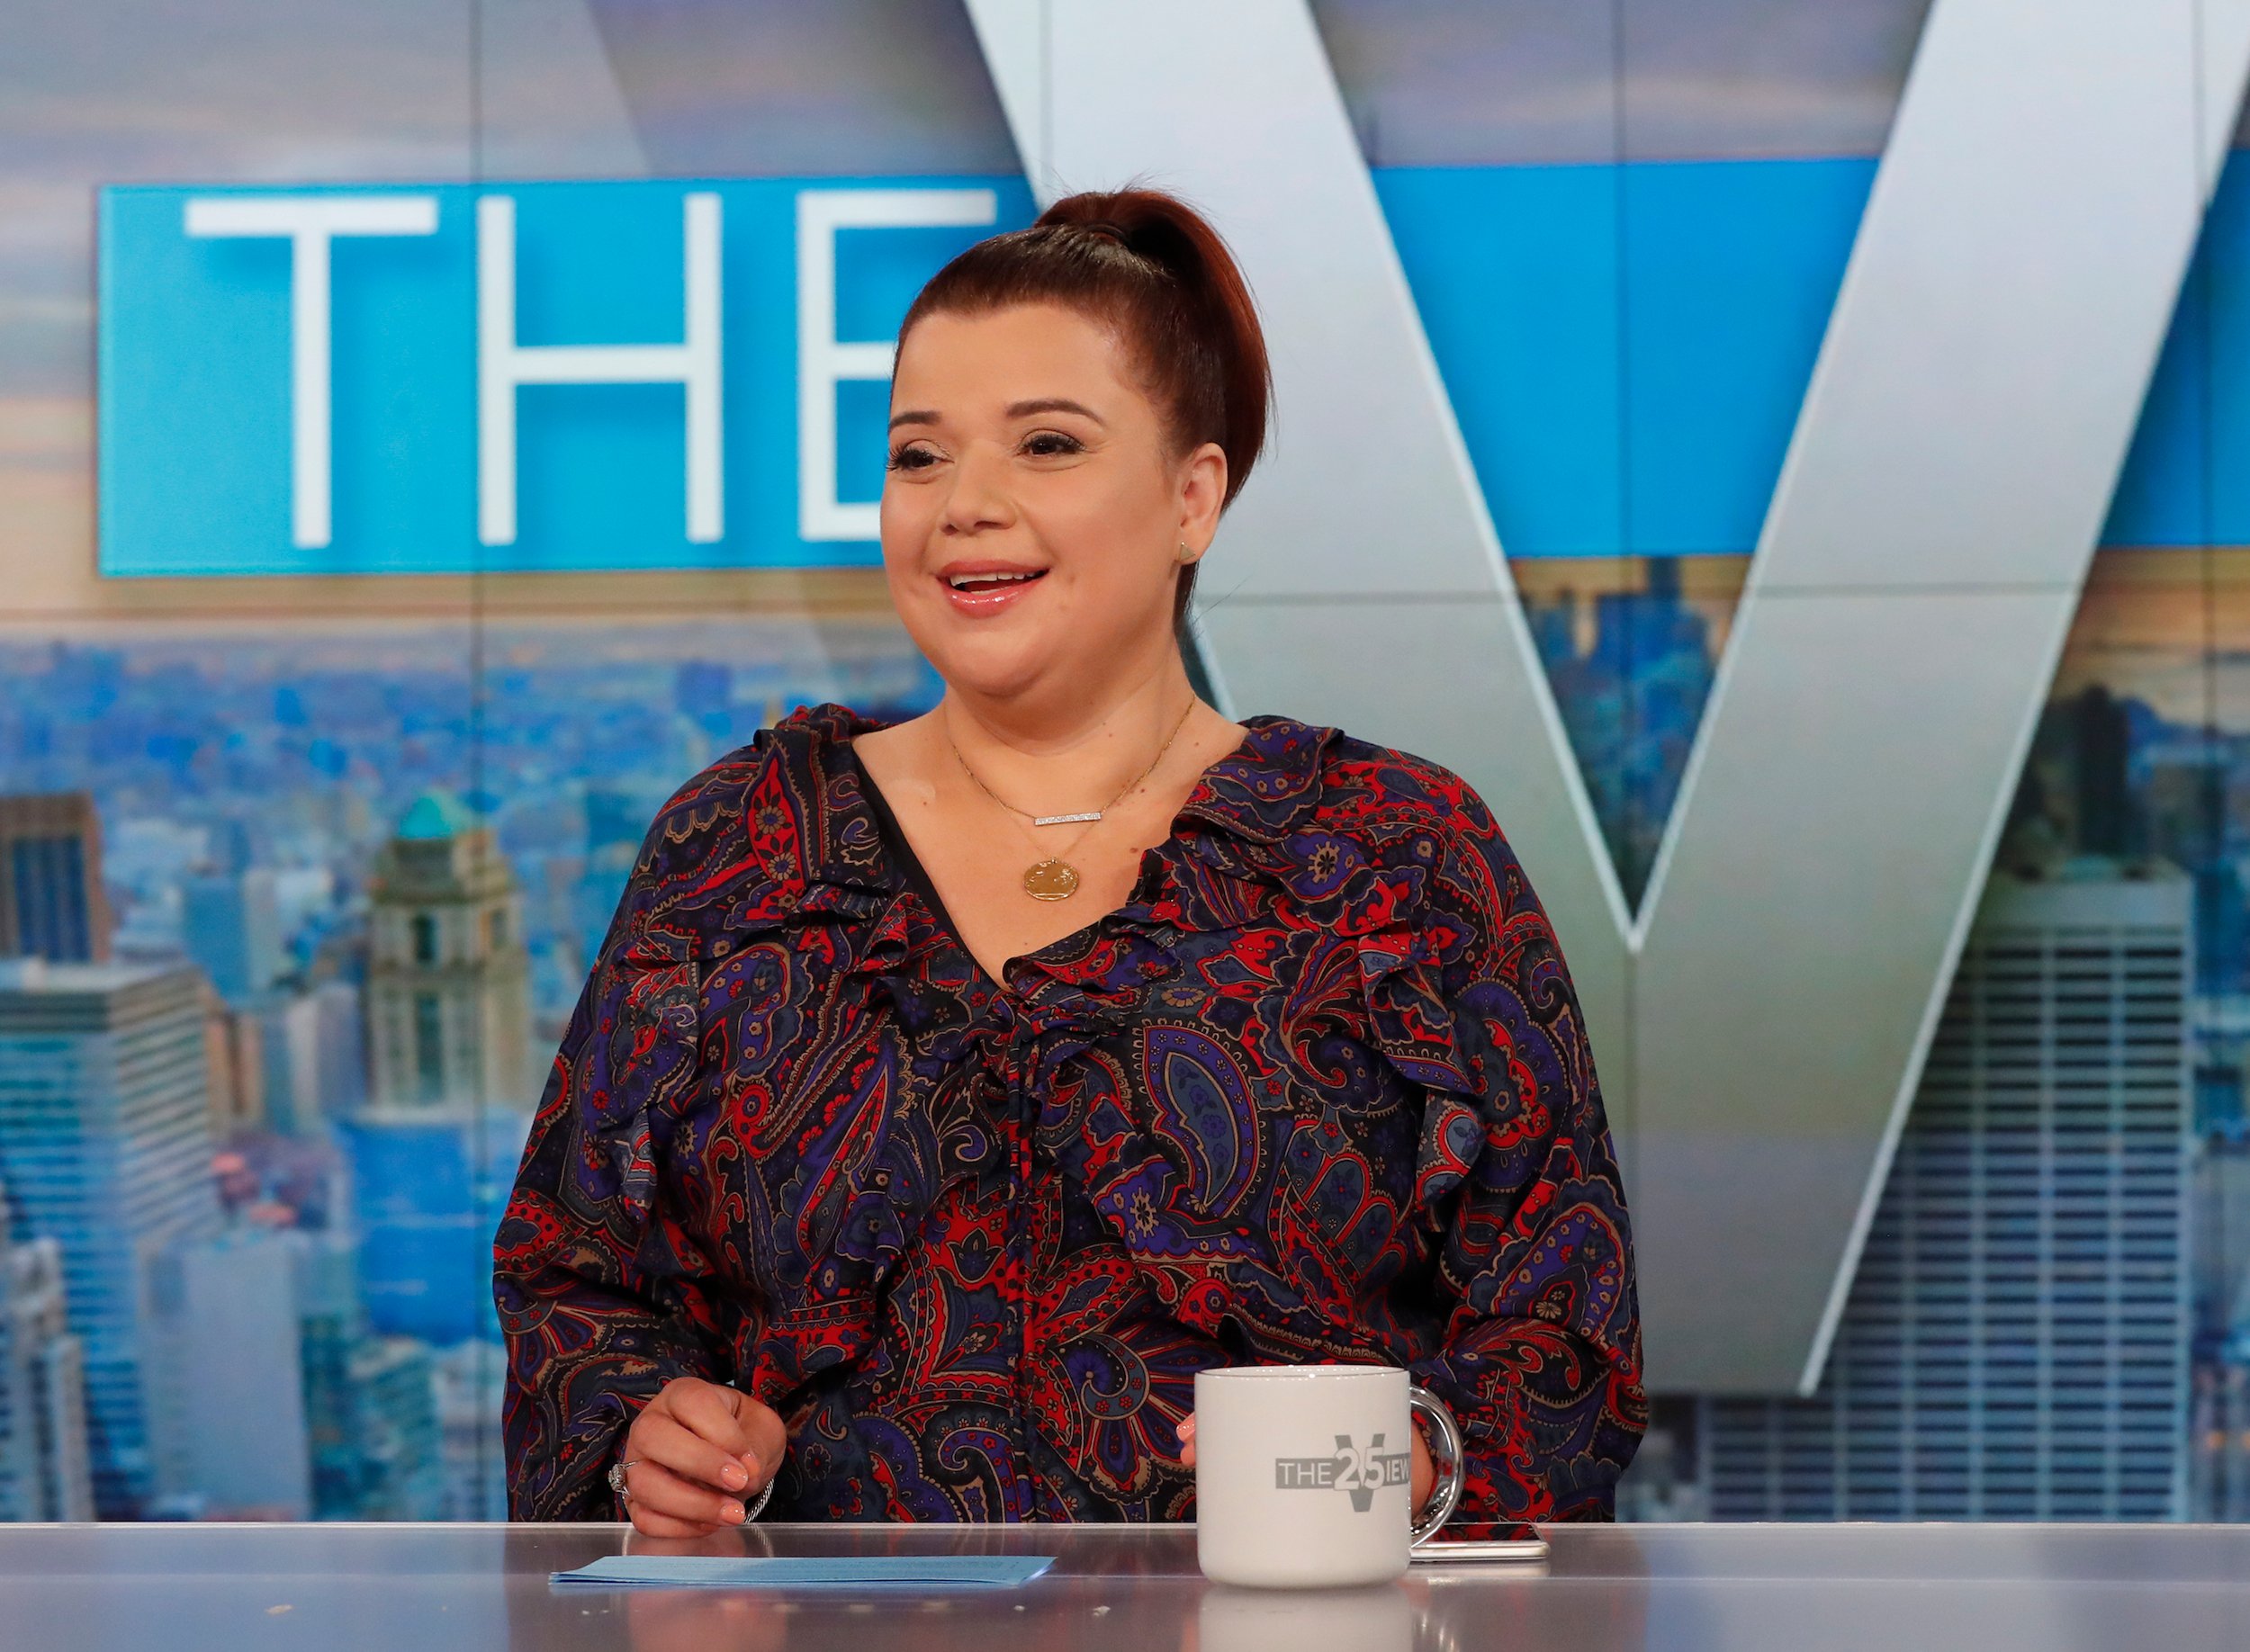 Ana Navarro smiling on the set of 'The View' wearing a loose top